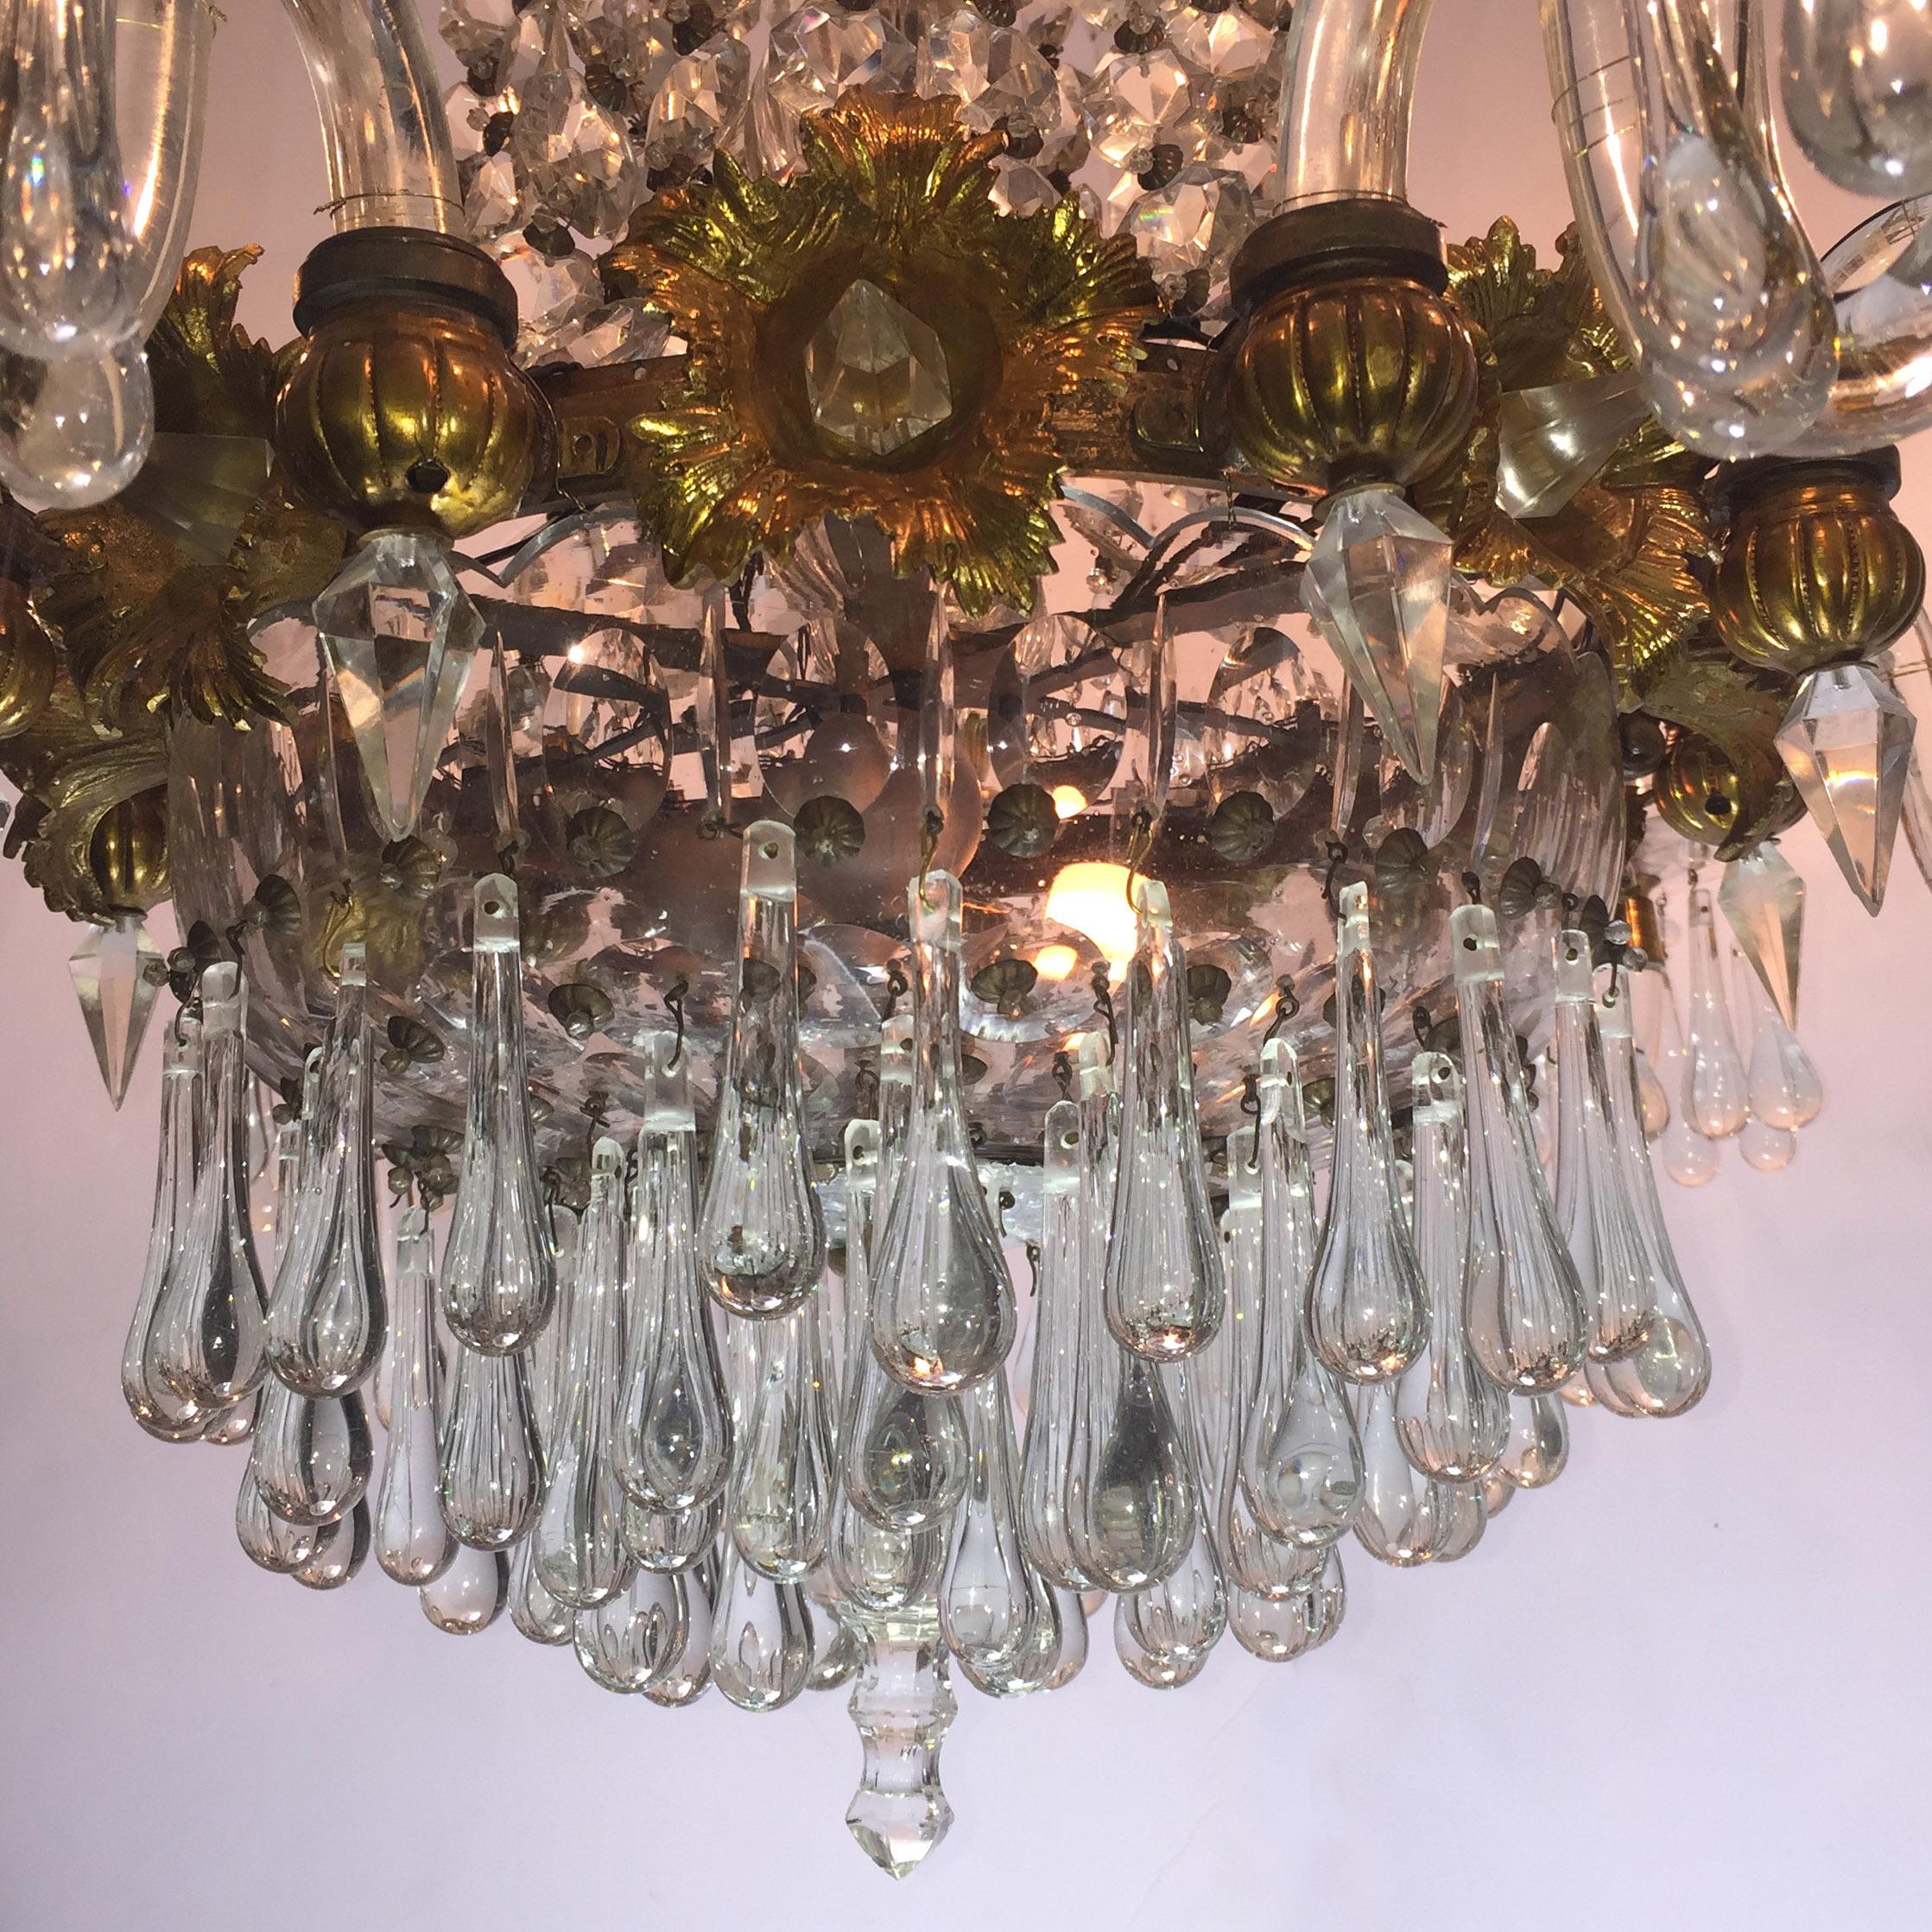 Italian Mid-19th Century Chandelier Gilded Wood and Crystal 12 Lights For Sale 2